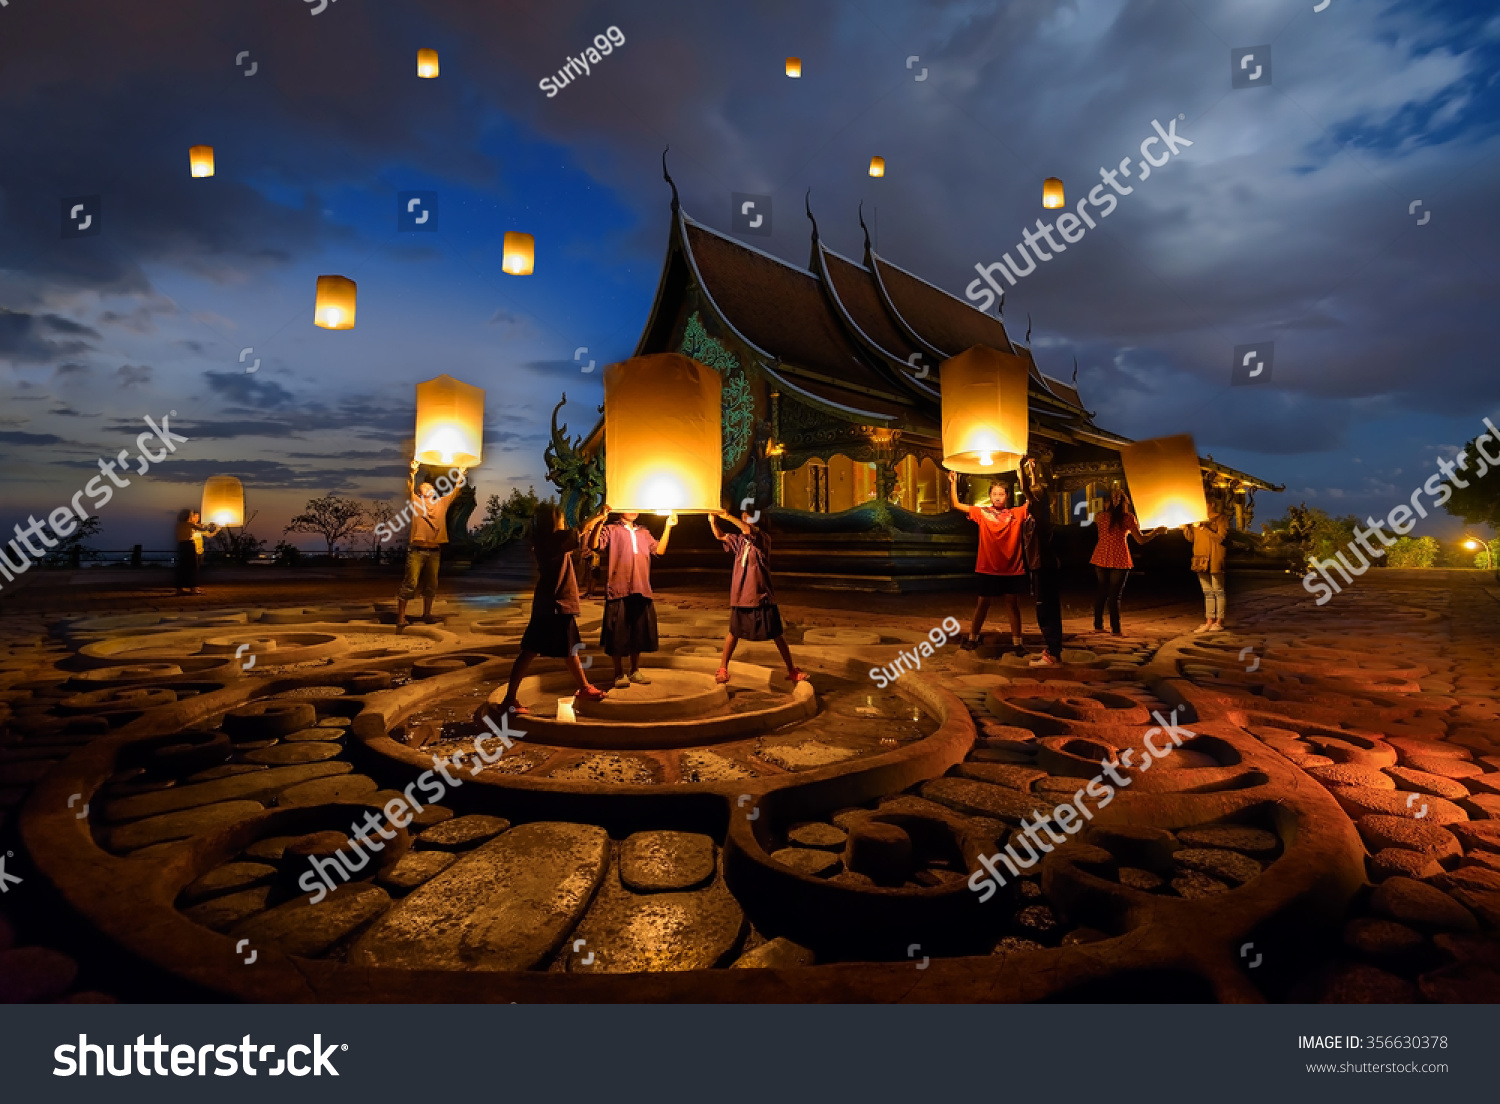 People floating lamp in yeepeng festival at pagoda tree glow temple  #356630378